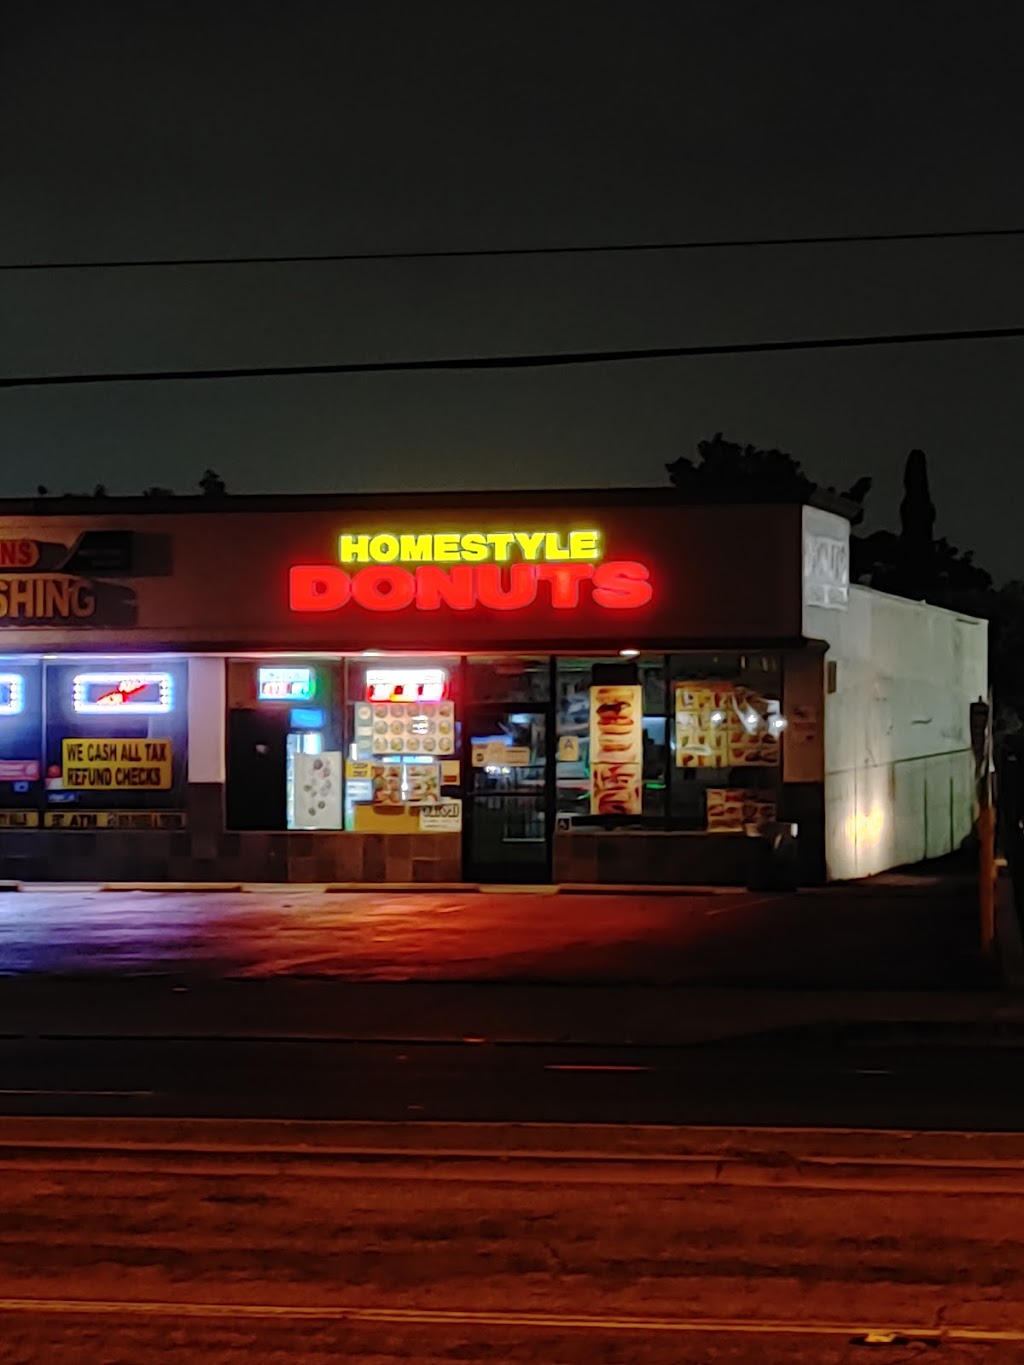 Homestyle Donuts | 11520 Slauson Ave, Whittier, CA 90606 | Phone: (562) 908-1111